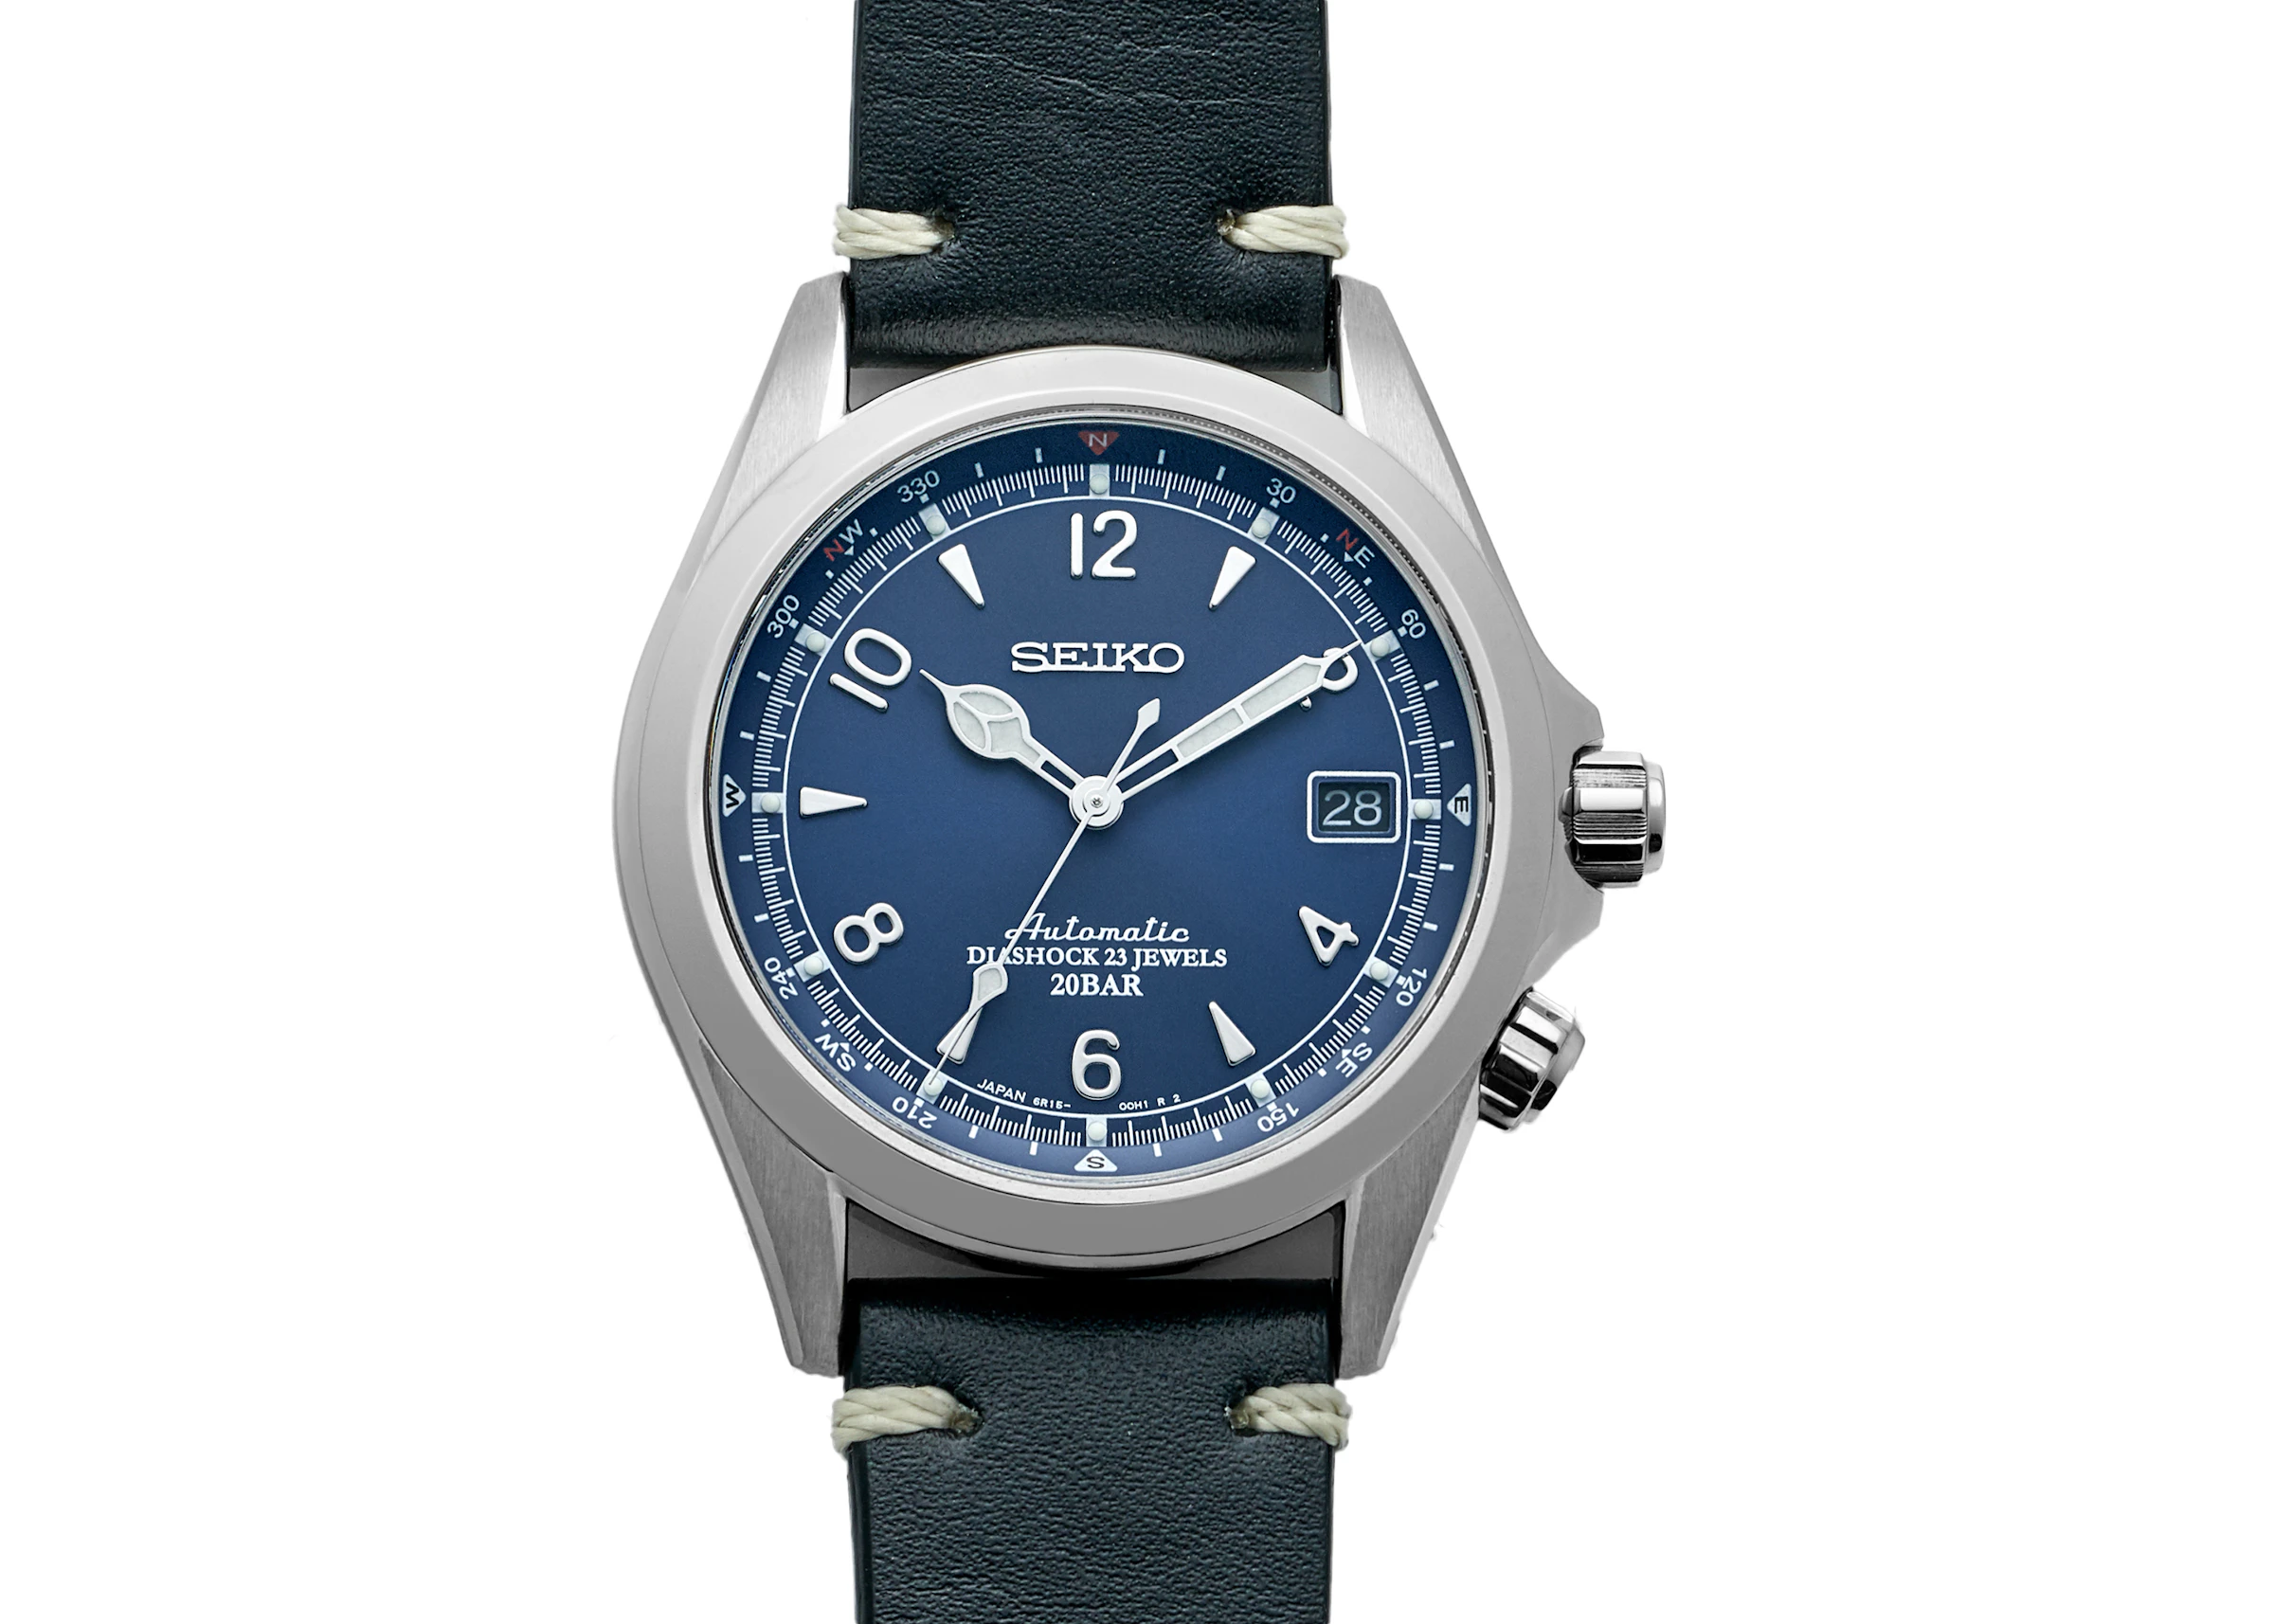 Seiko Alpinist US Edition SPB089  in Stainless Steel - US